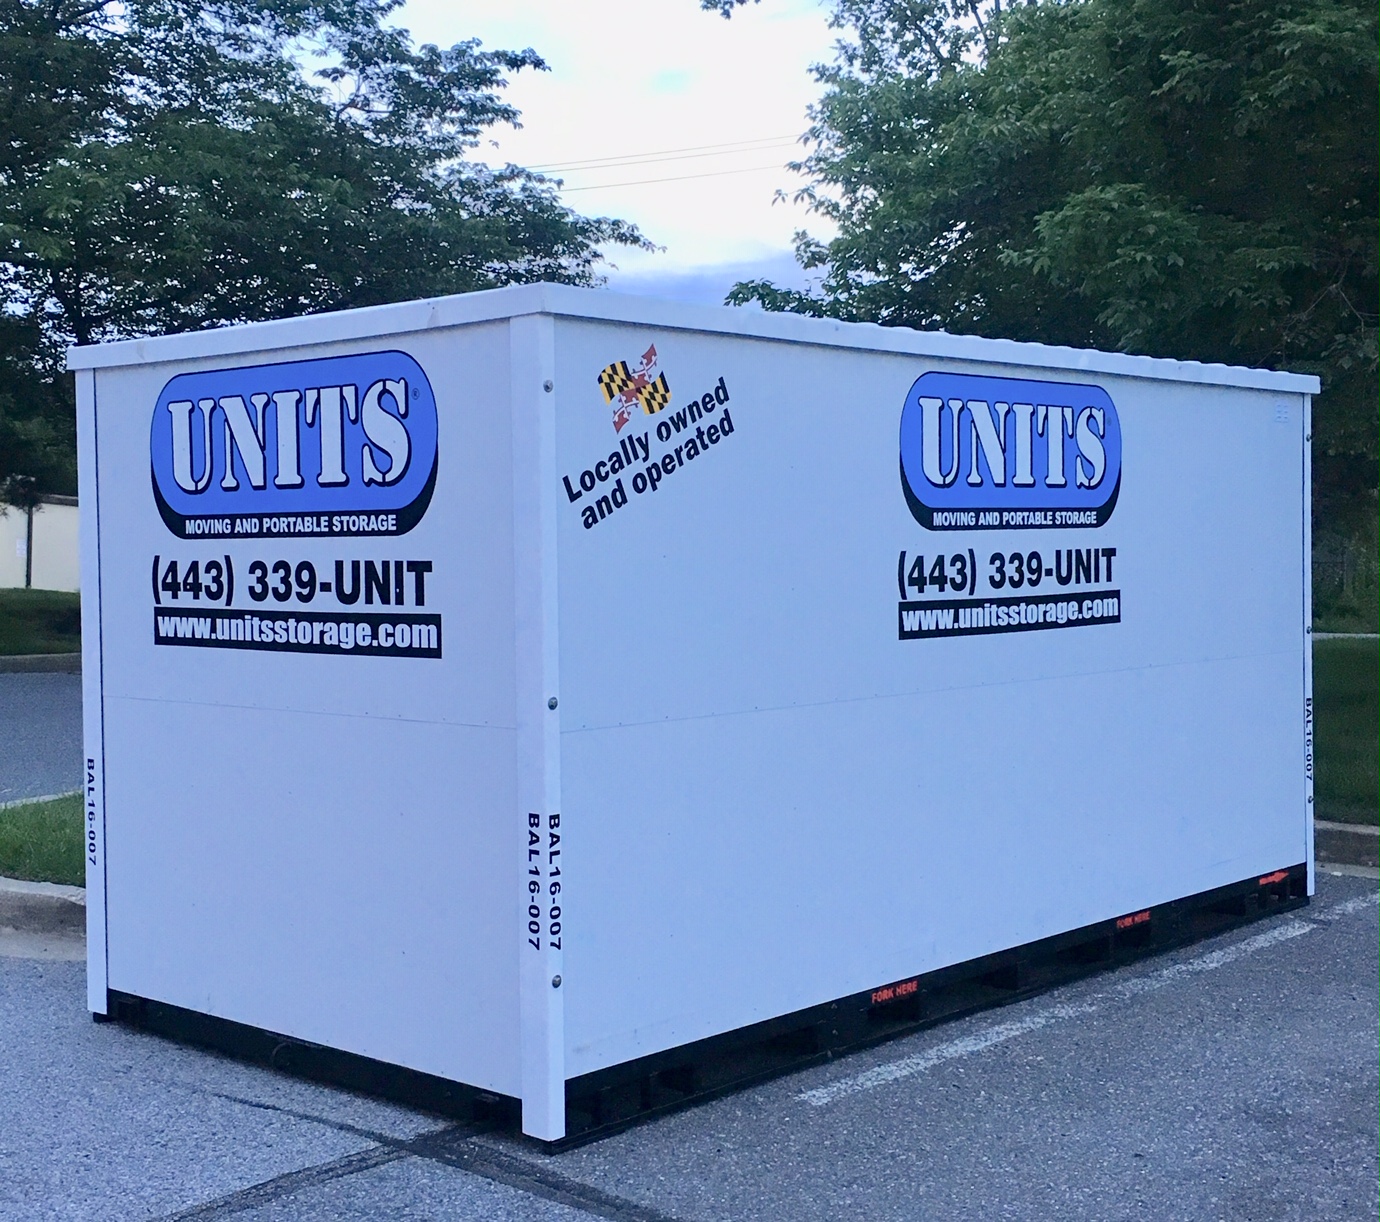 Units portable storage container sitting in a driveway in Baltimore Maryland